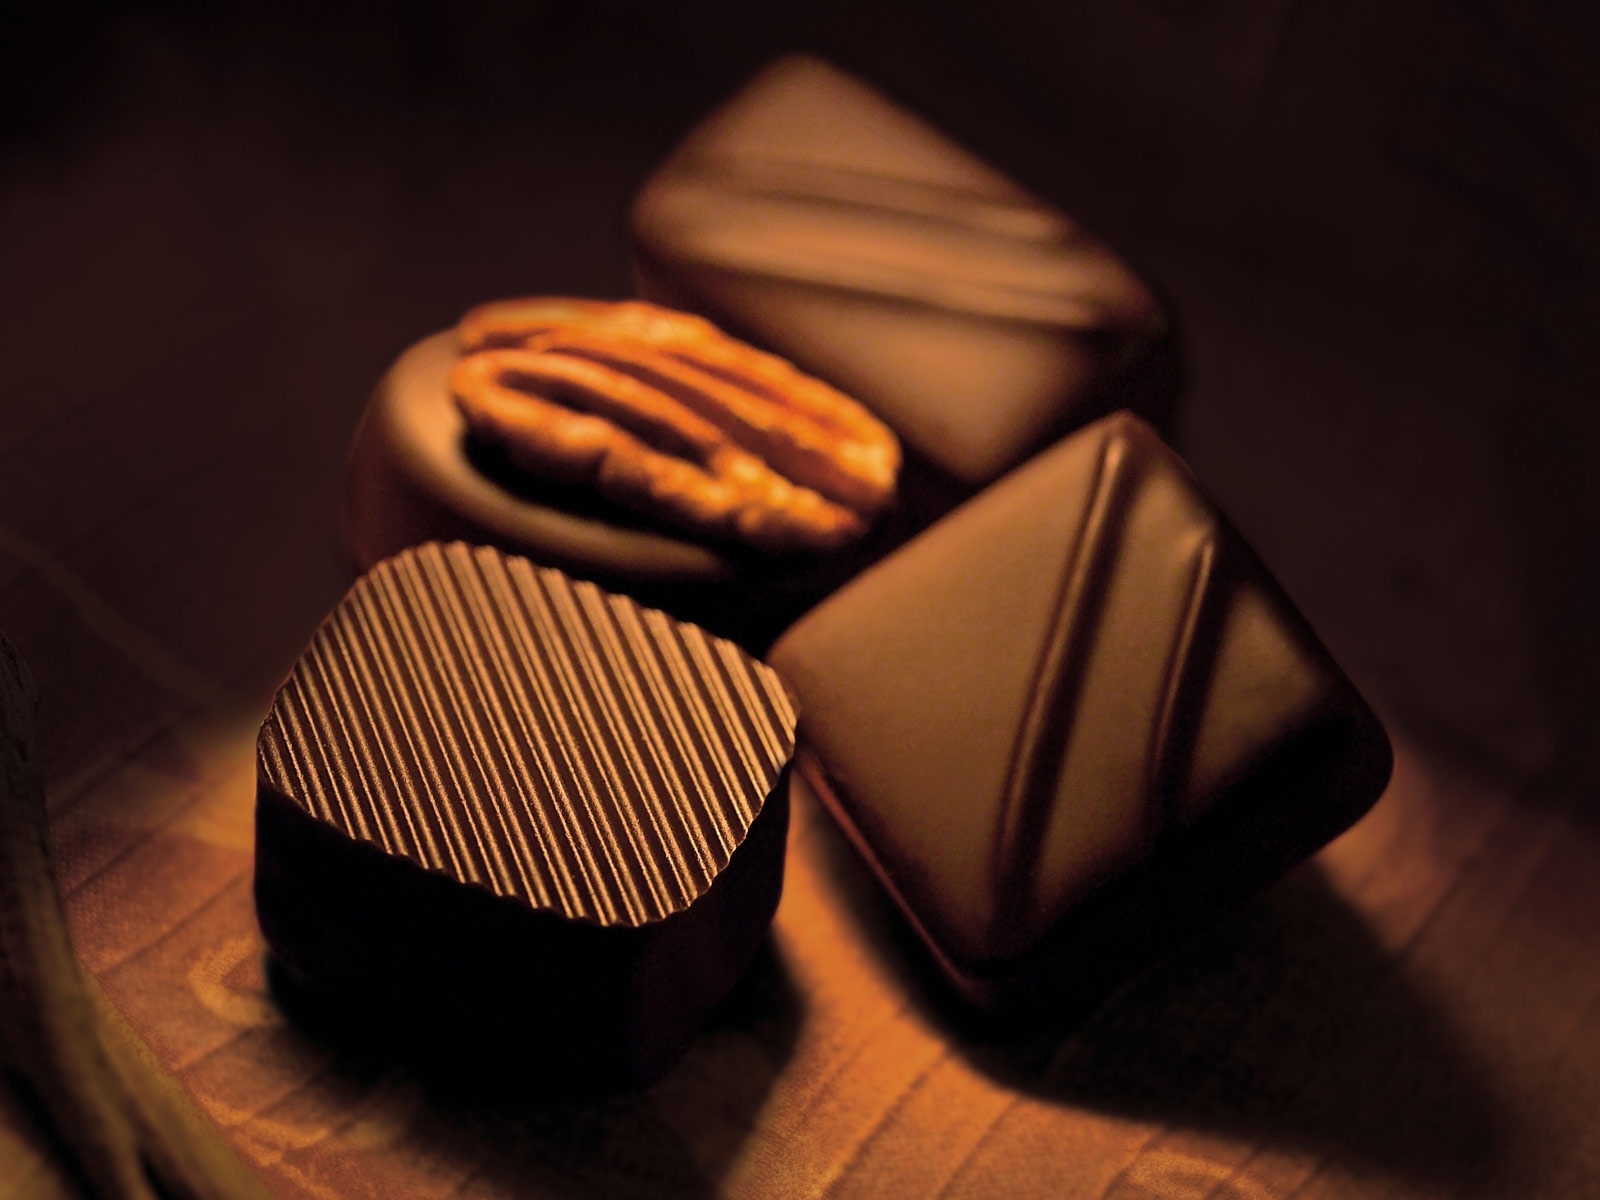 chocolate, food, candies images